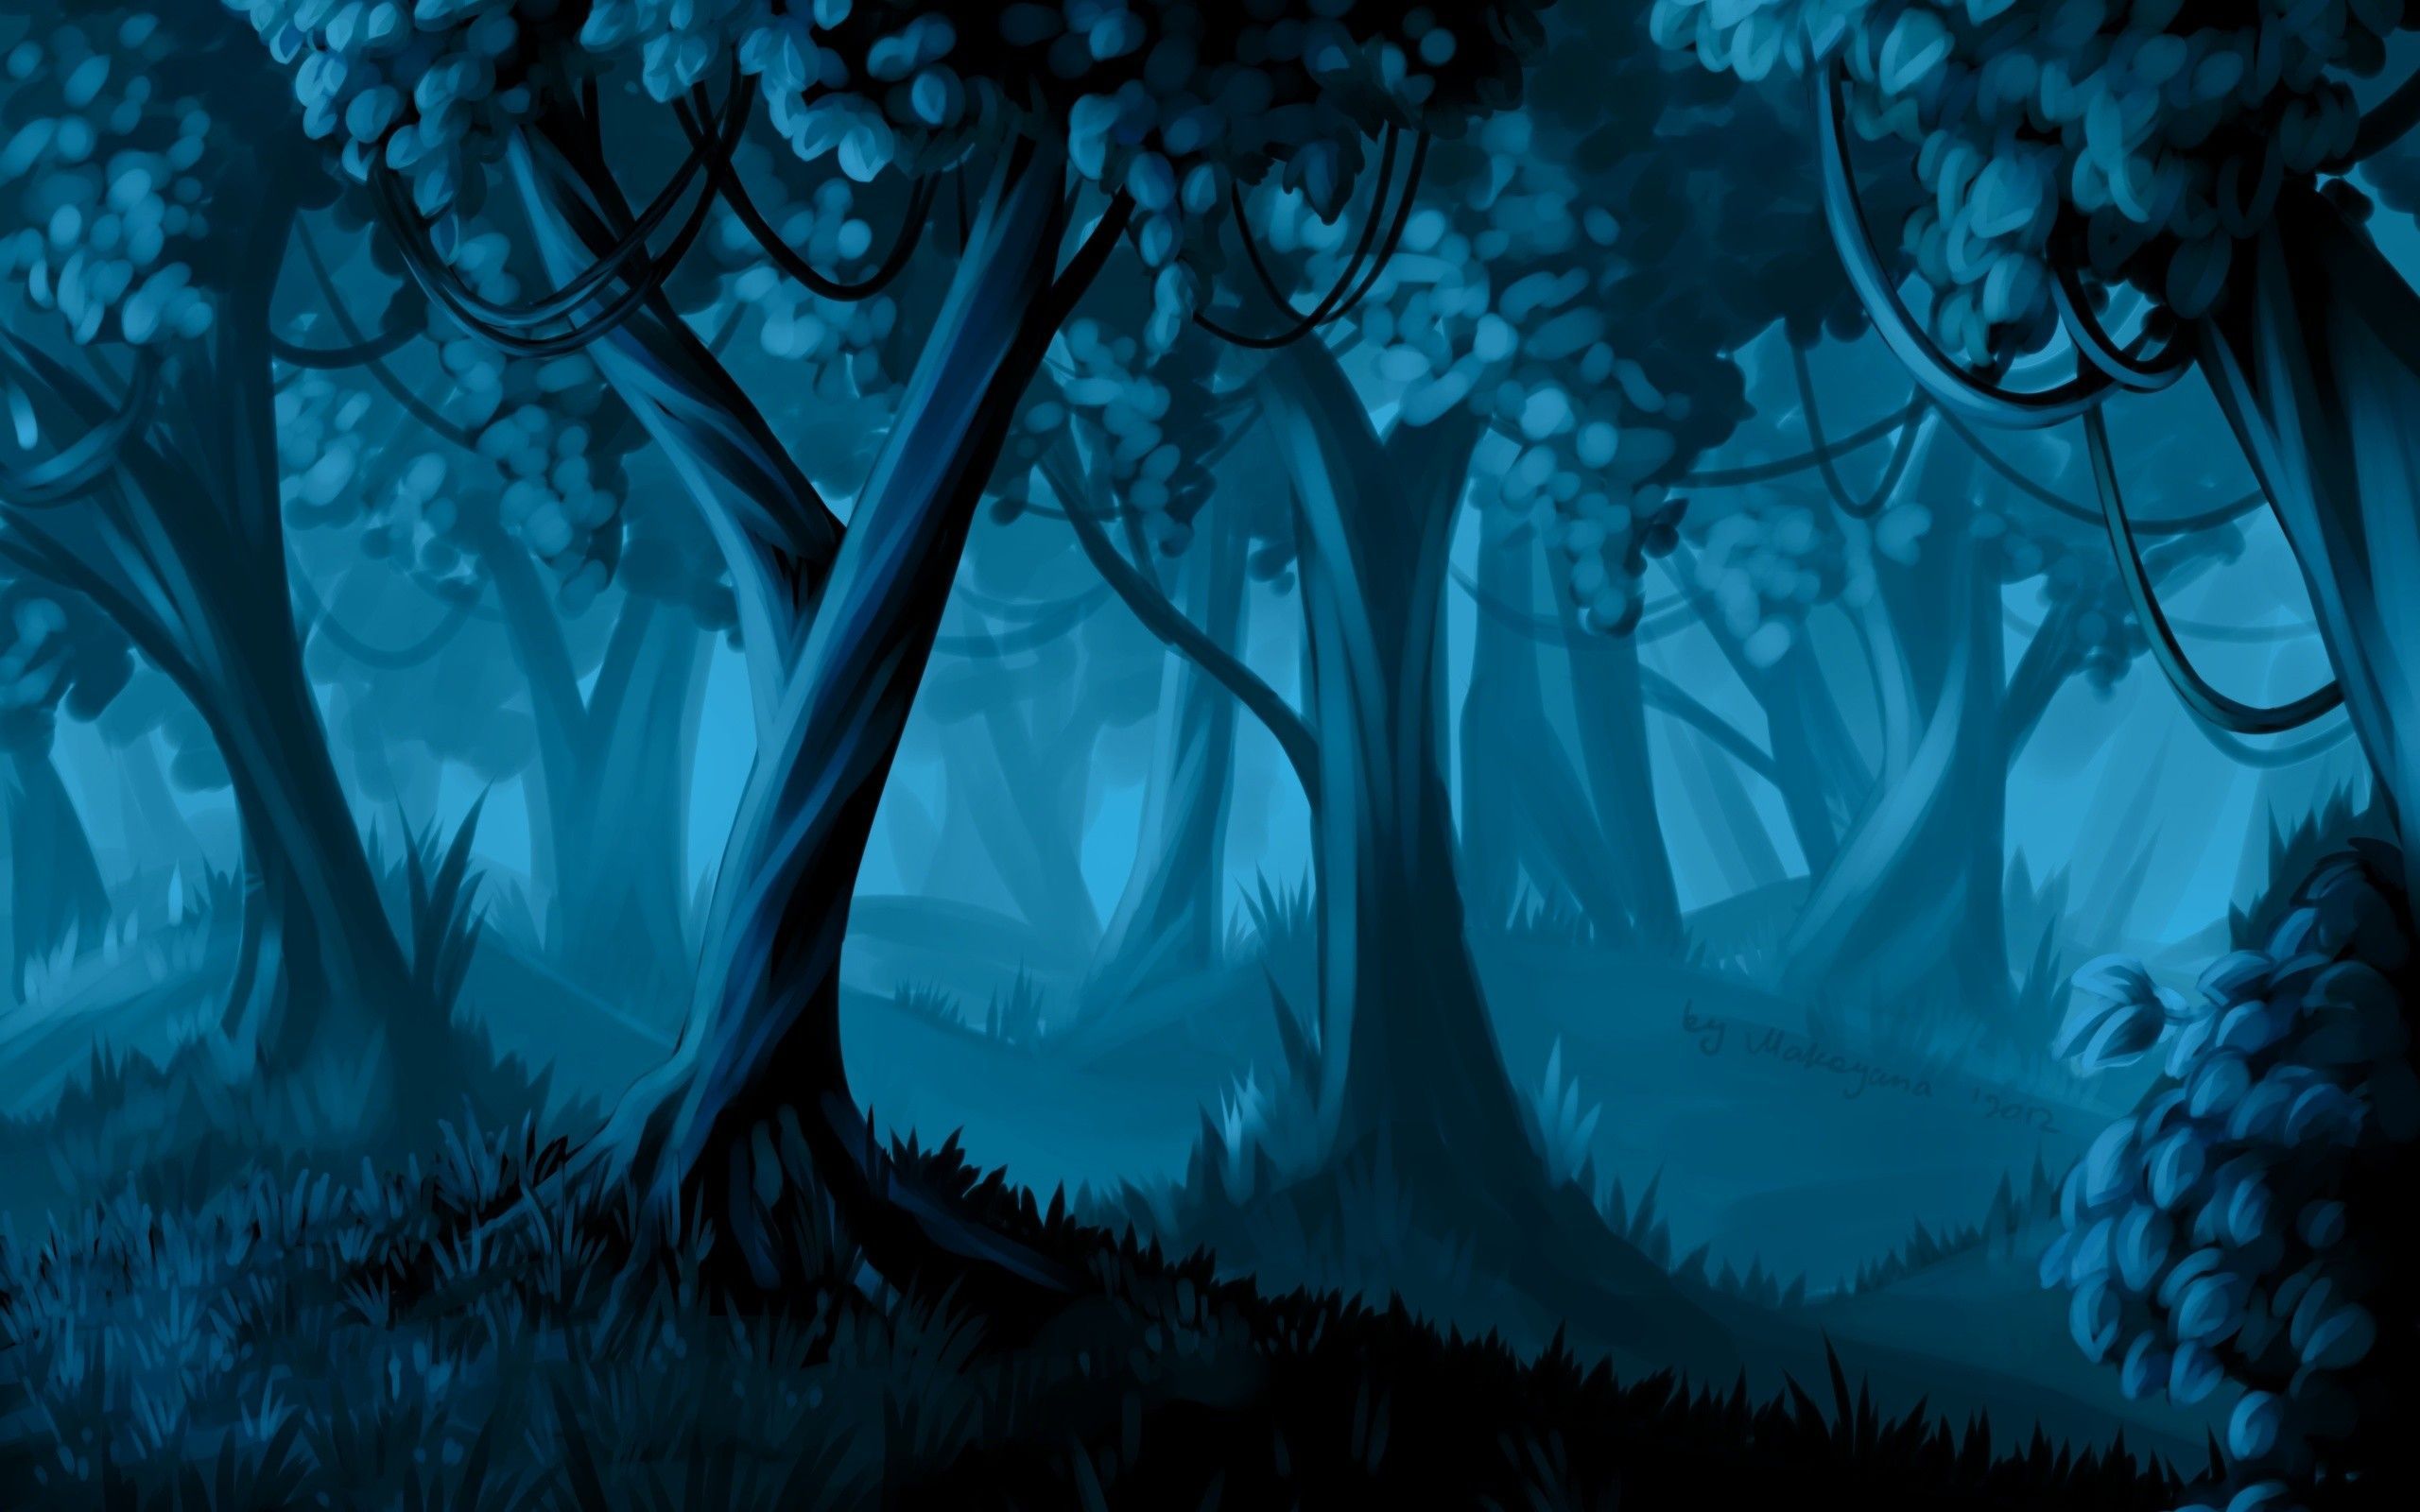 Blue forest in the night from the story. Drawings, Paintings, Sketches, Design, Artwork Wallpaper. HD Wall. Fantasy forest, Forest painting, Night forest